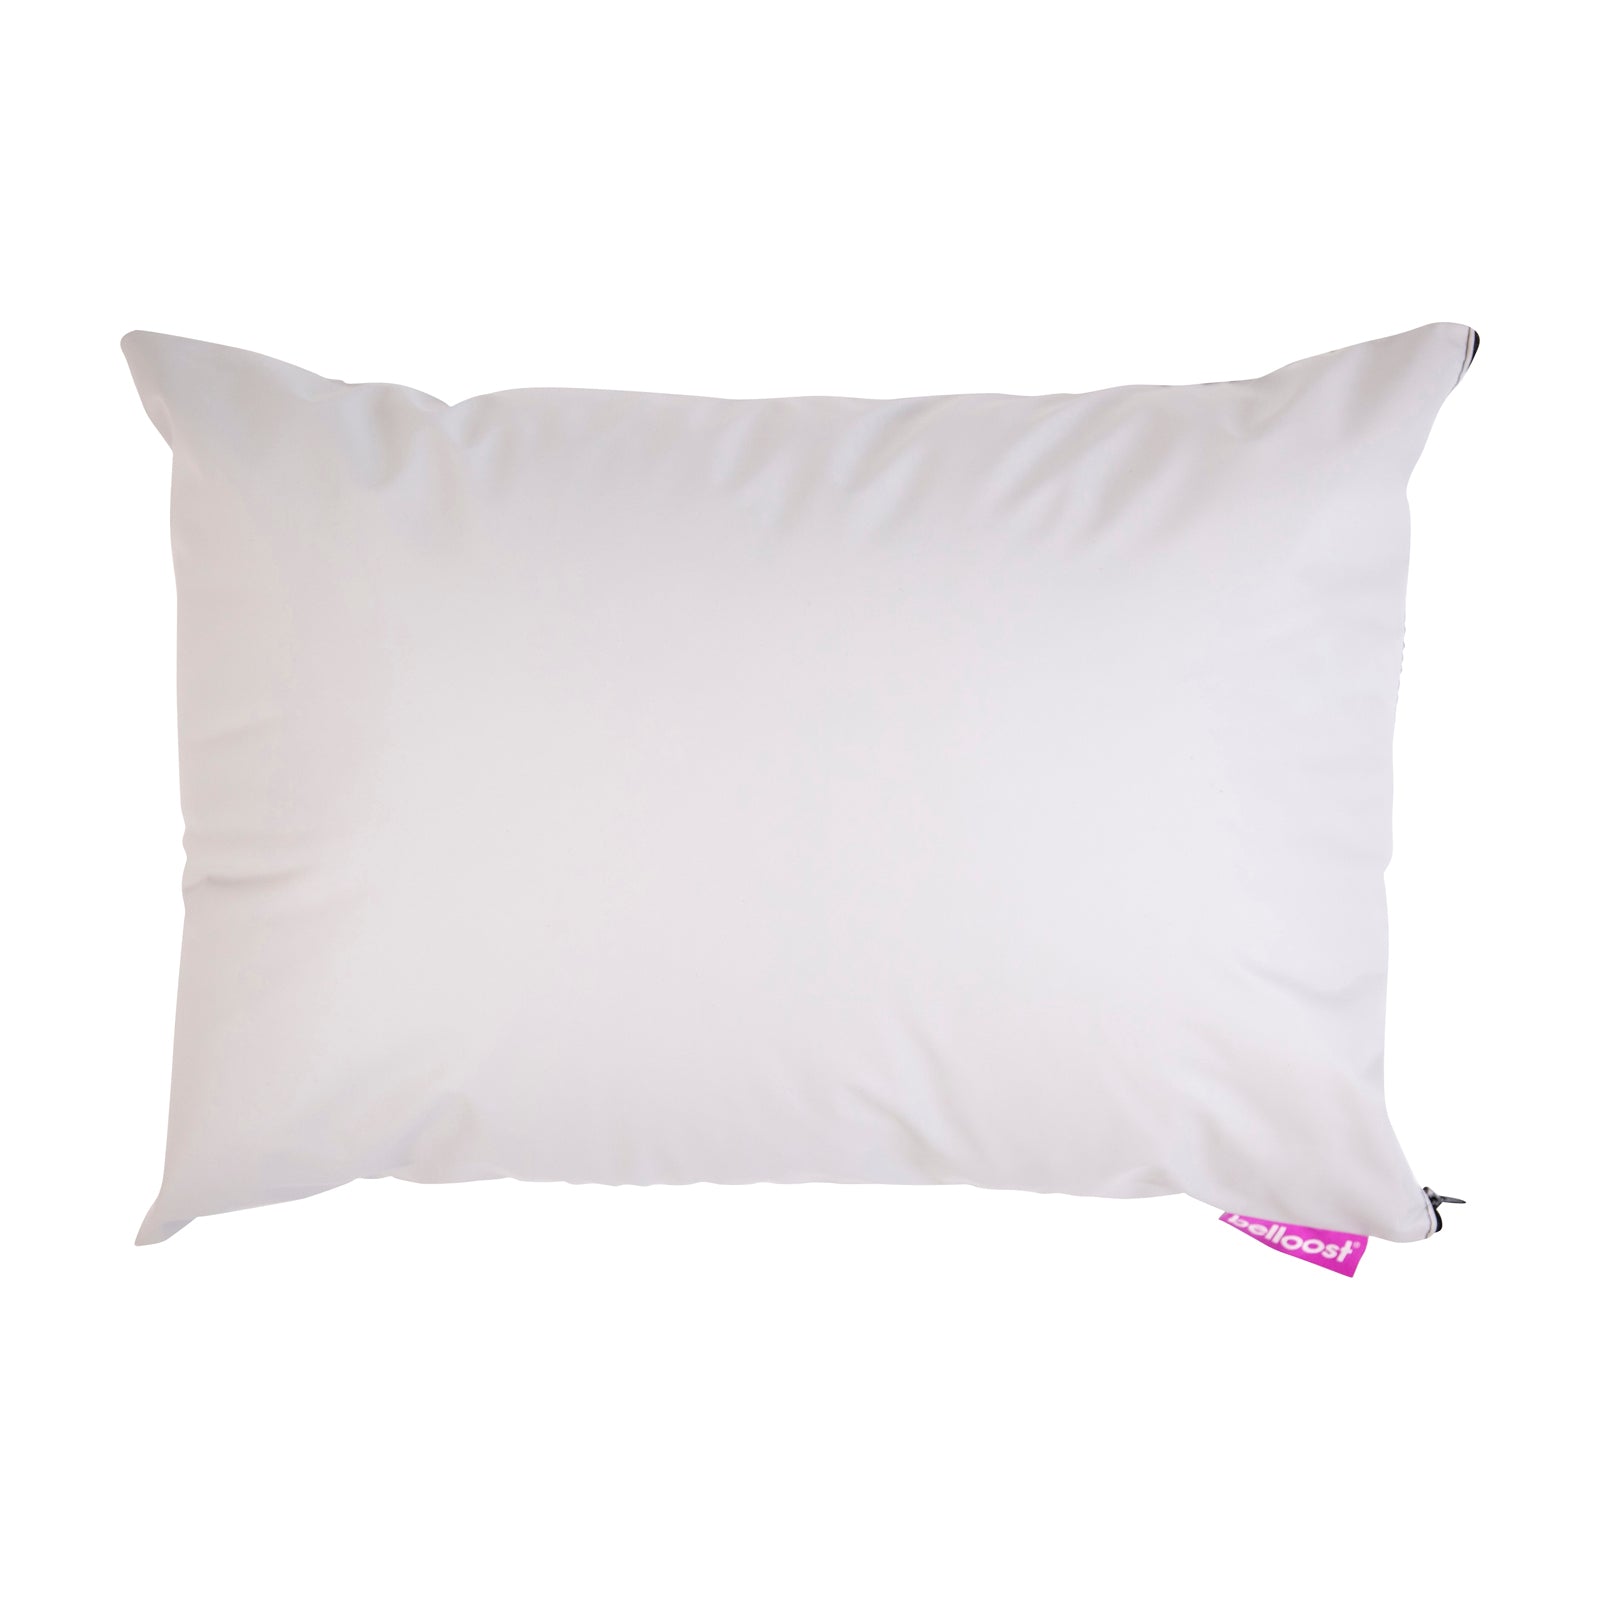 Professional Medical Grade Wipeable Large Rectangle Pillow Cover / White - Clearance (On one side only 1 faint line of 4 dots 1mm wide 0.5cm long, 3cm from top 20cm from side, 6cm below it a faint blue line 1mm wide 10cm long) - Belloost®